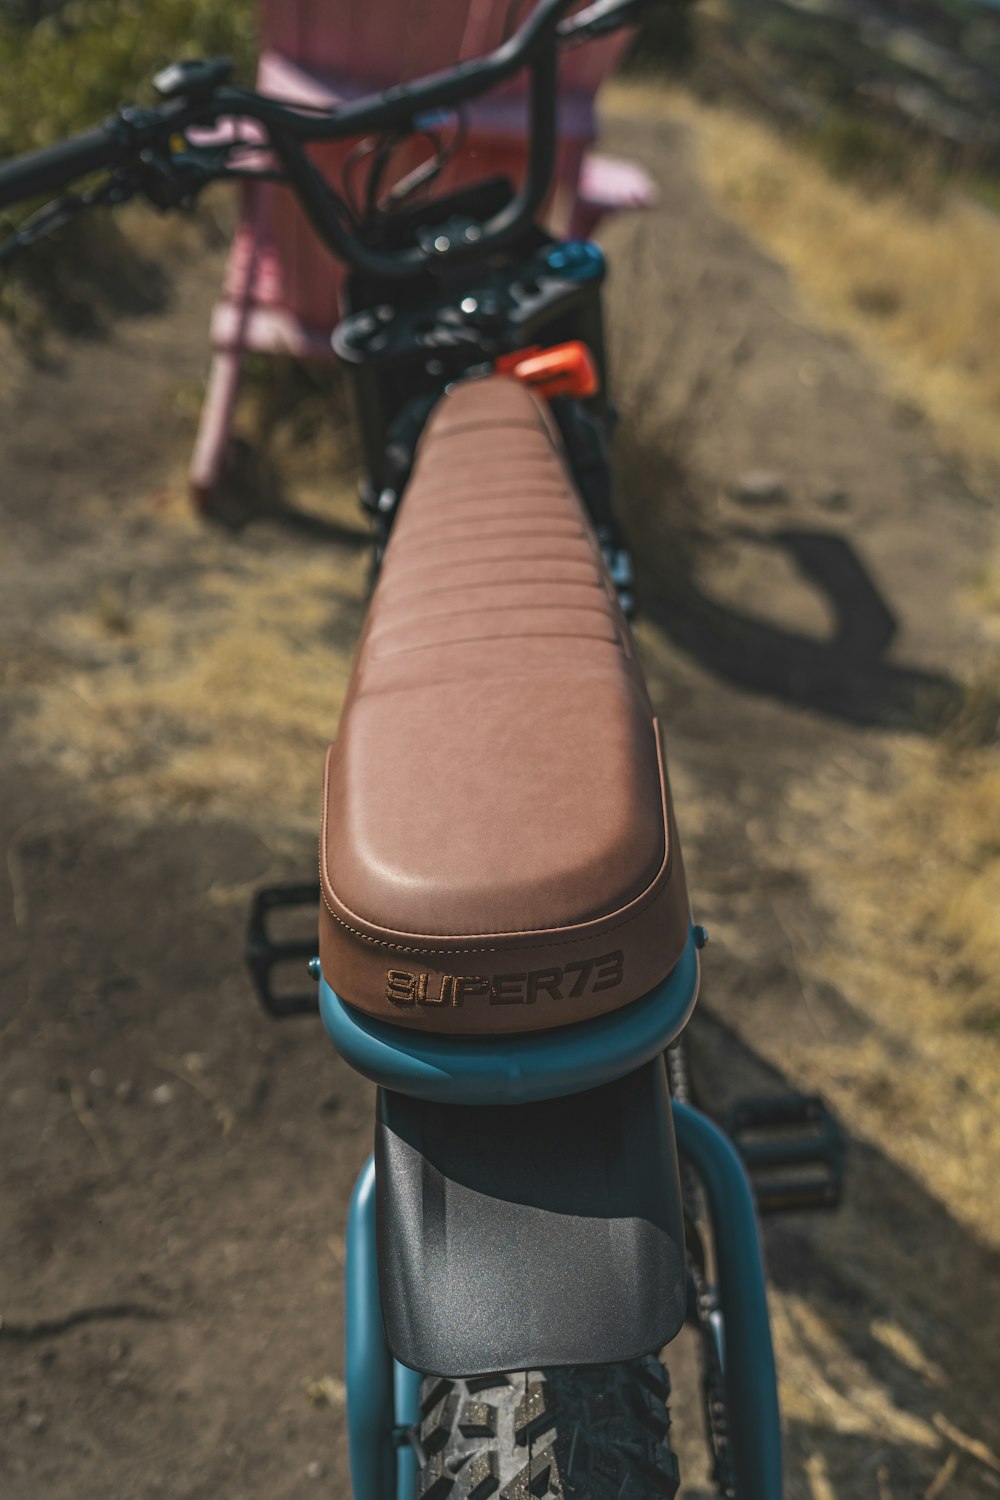 a close up of the seat on a bike